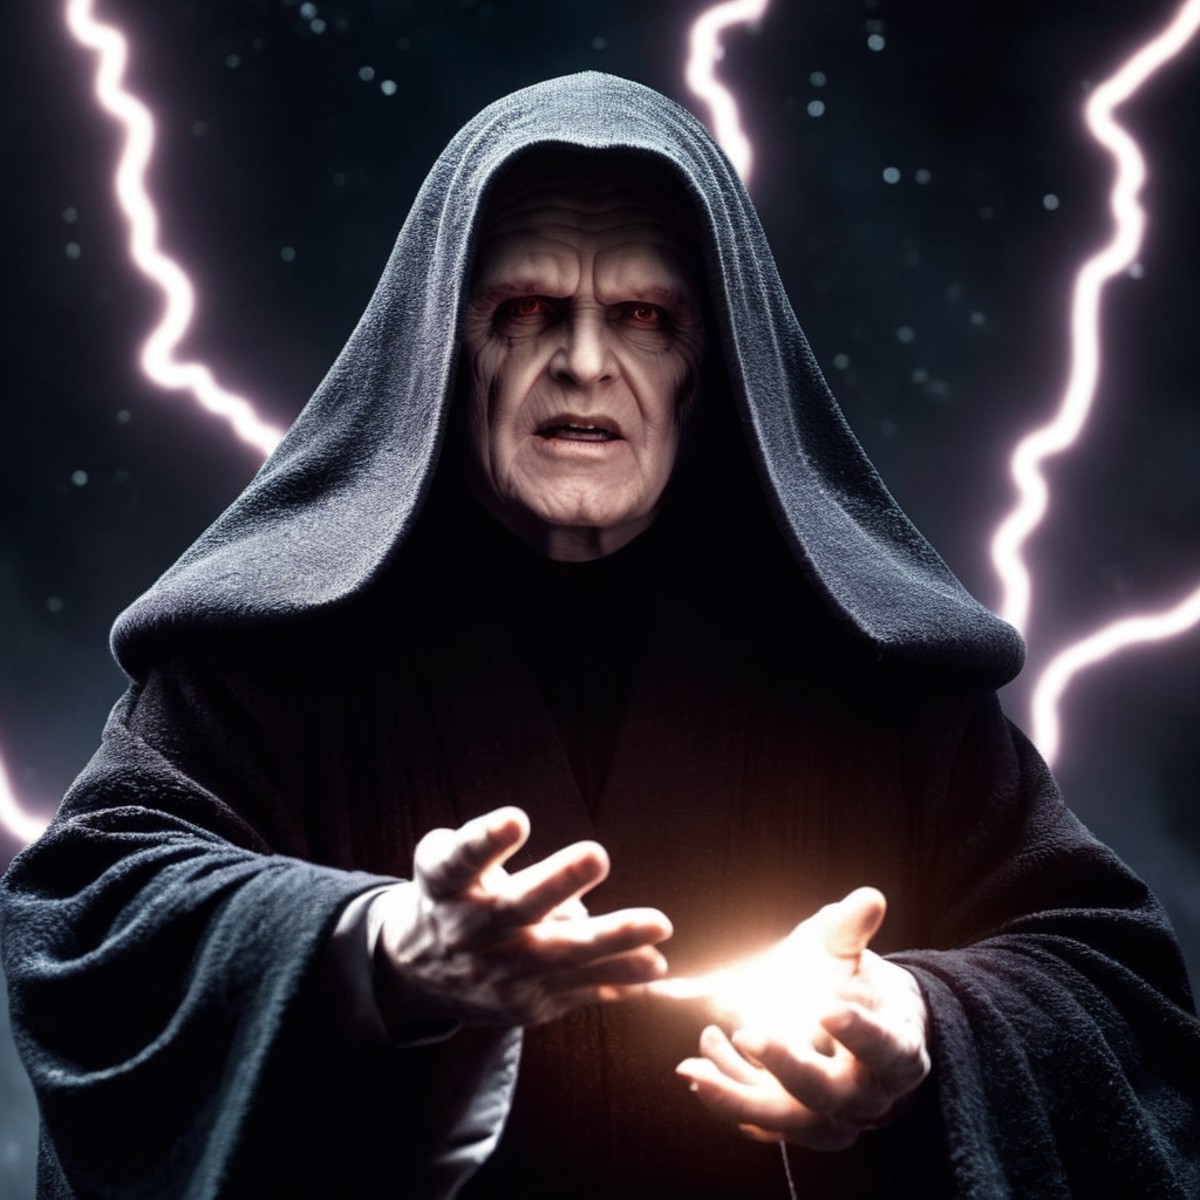 cinematic film still of  <lora:Darth Sidious:1>
Darth Sidious a man in a robe shoot Force lightning from his hands in star...